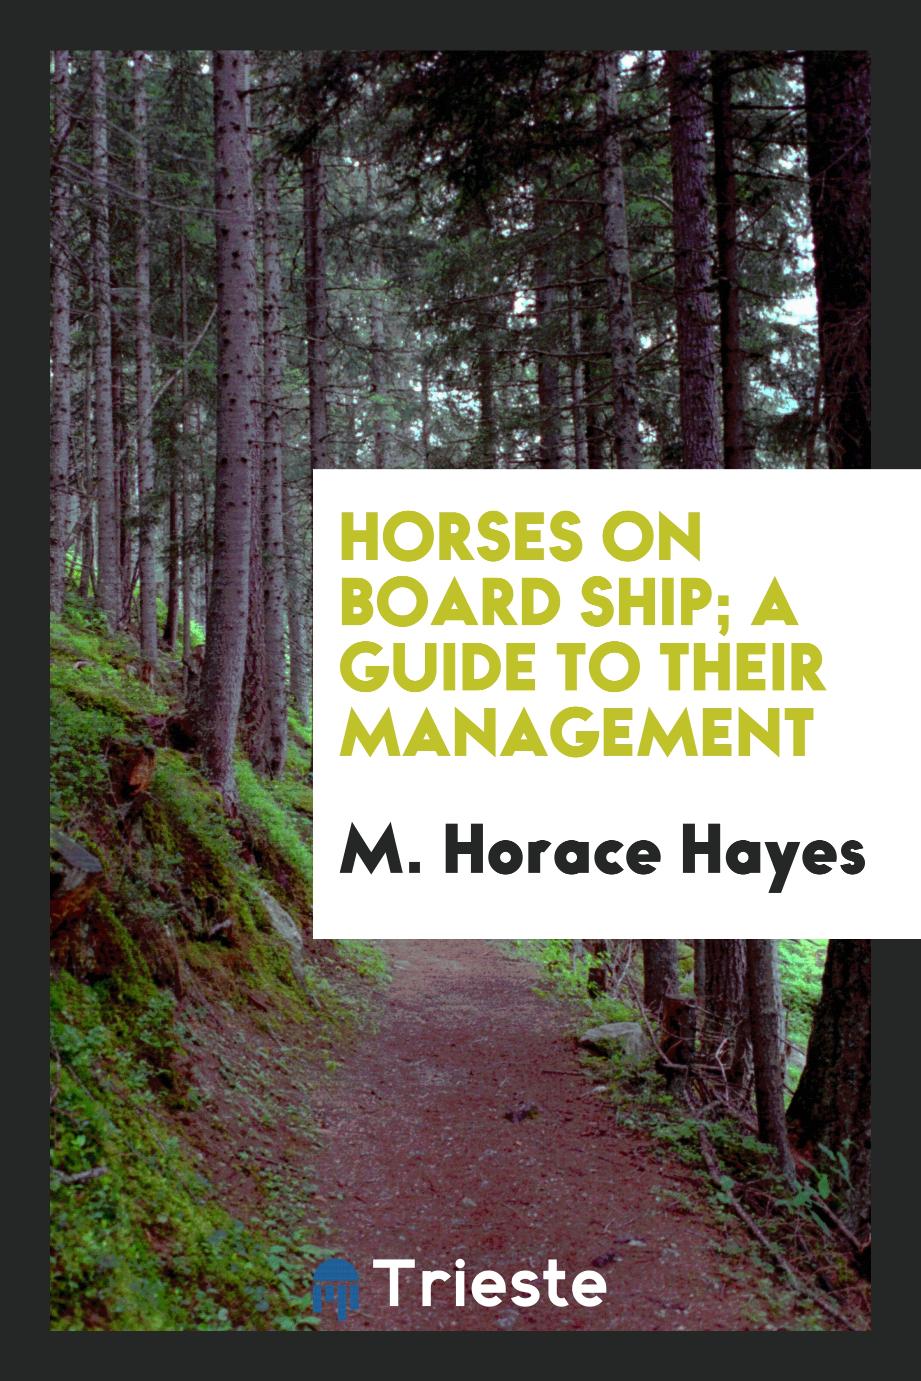 Horses on board ship; a guide to their management